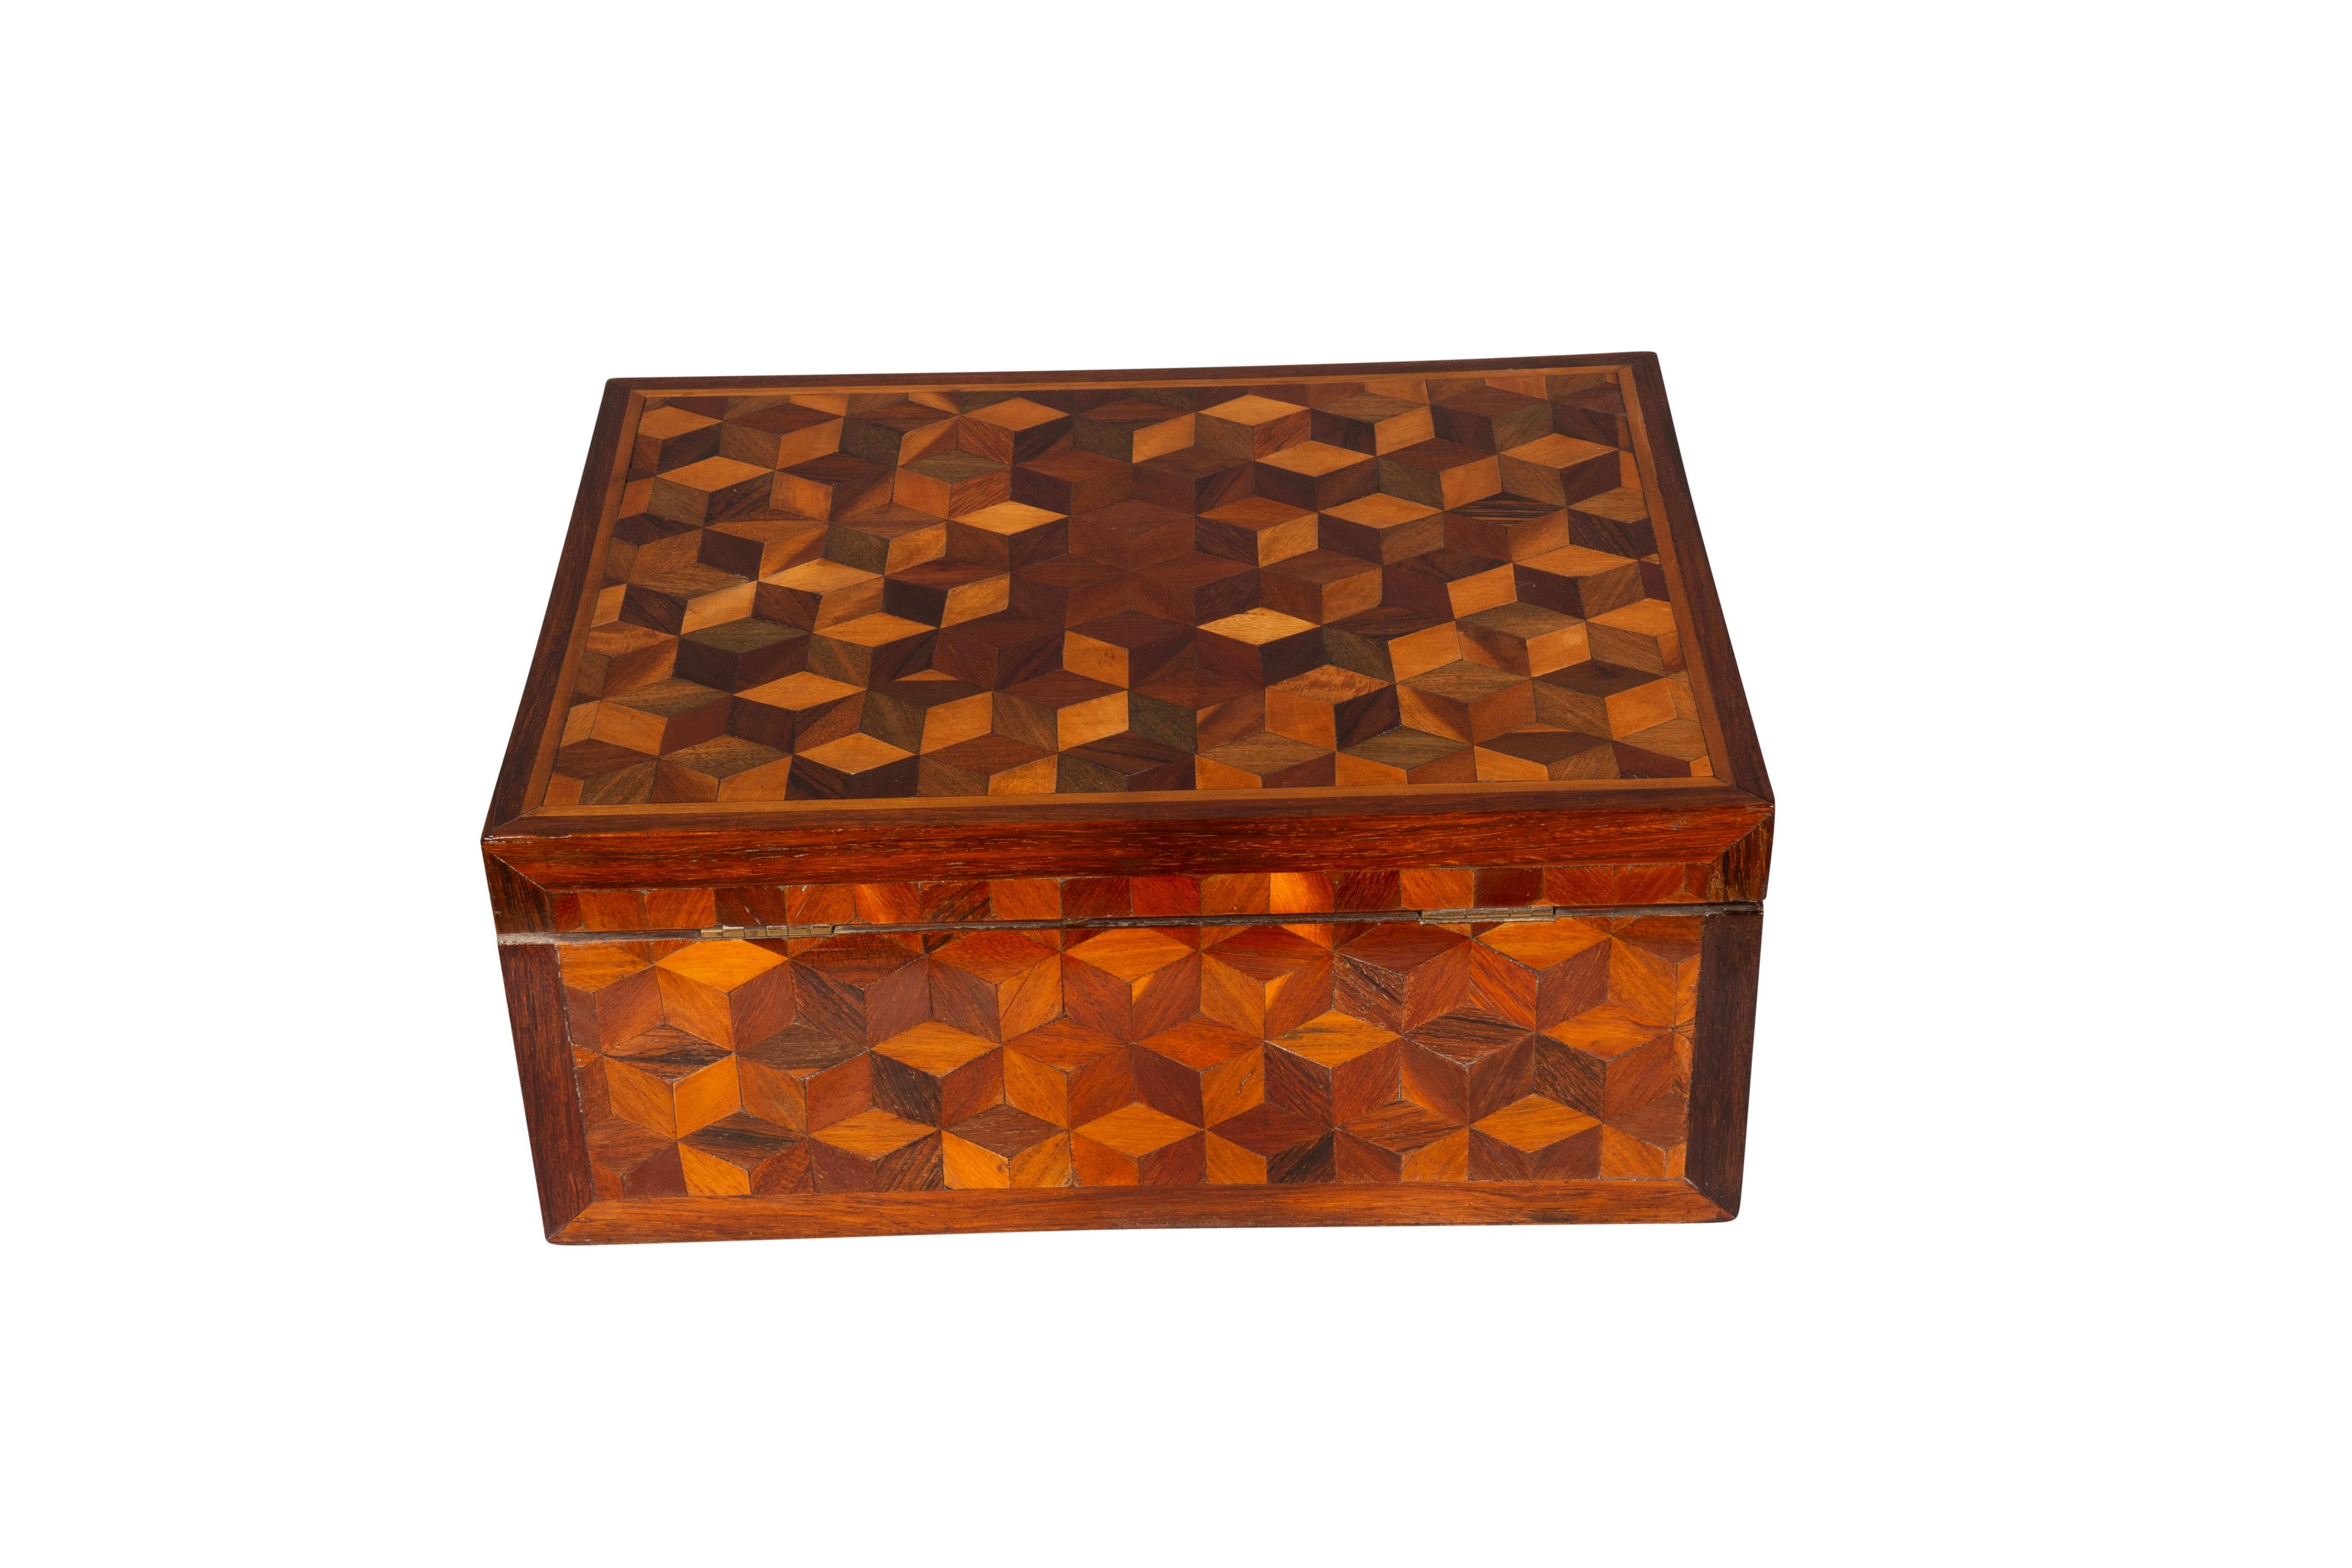 Early 19th Century Regency Parquetry Box For Sale